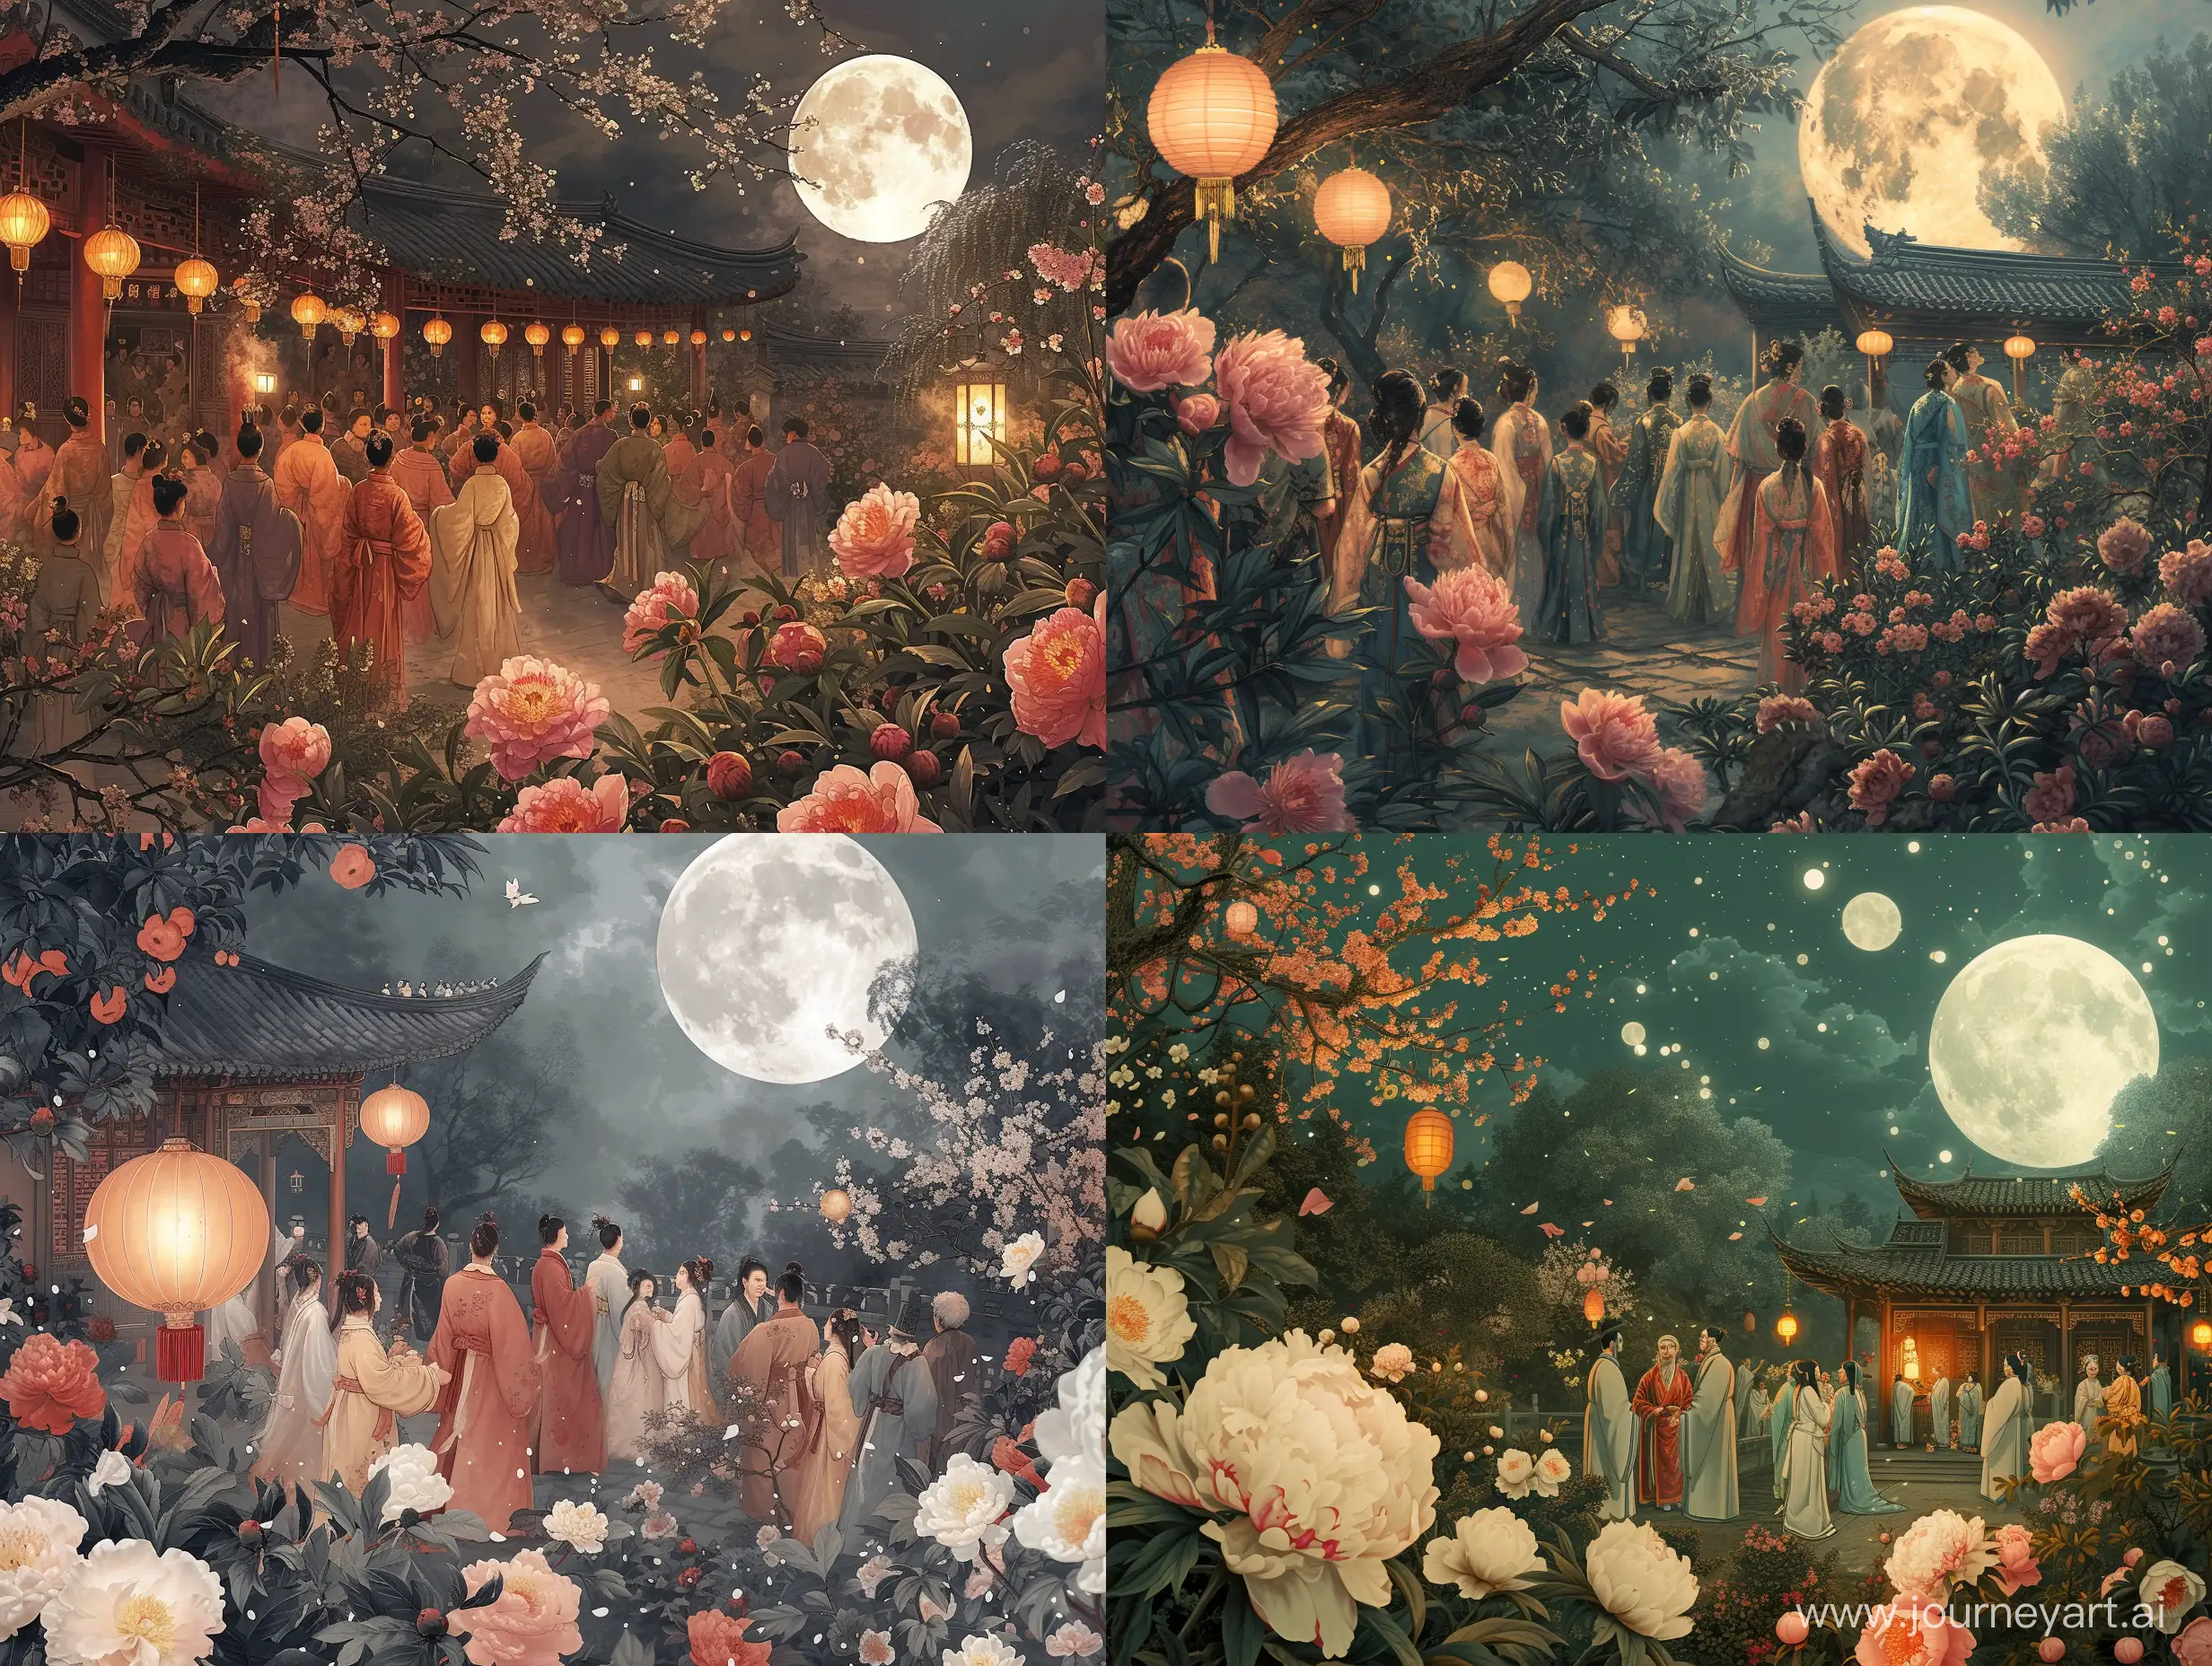 A detailed ink painting of a Lunar New Year celebration in the Song Dynasty, with people wearing traditional silk robes, gathered in a lush imperial garden under the full moon. Peonies and plum blossoms bloom, lanterns illuminate the scene. Created Using: Fine brushwork, meticulous detail, Song Dynasty art style, nature-inspired themes, traditional Chinese symbols of prosperity and renewal, vibrant yet harmonious color palette, subtle lighting effects to mimic moonlight, hd quality, natural look